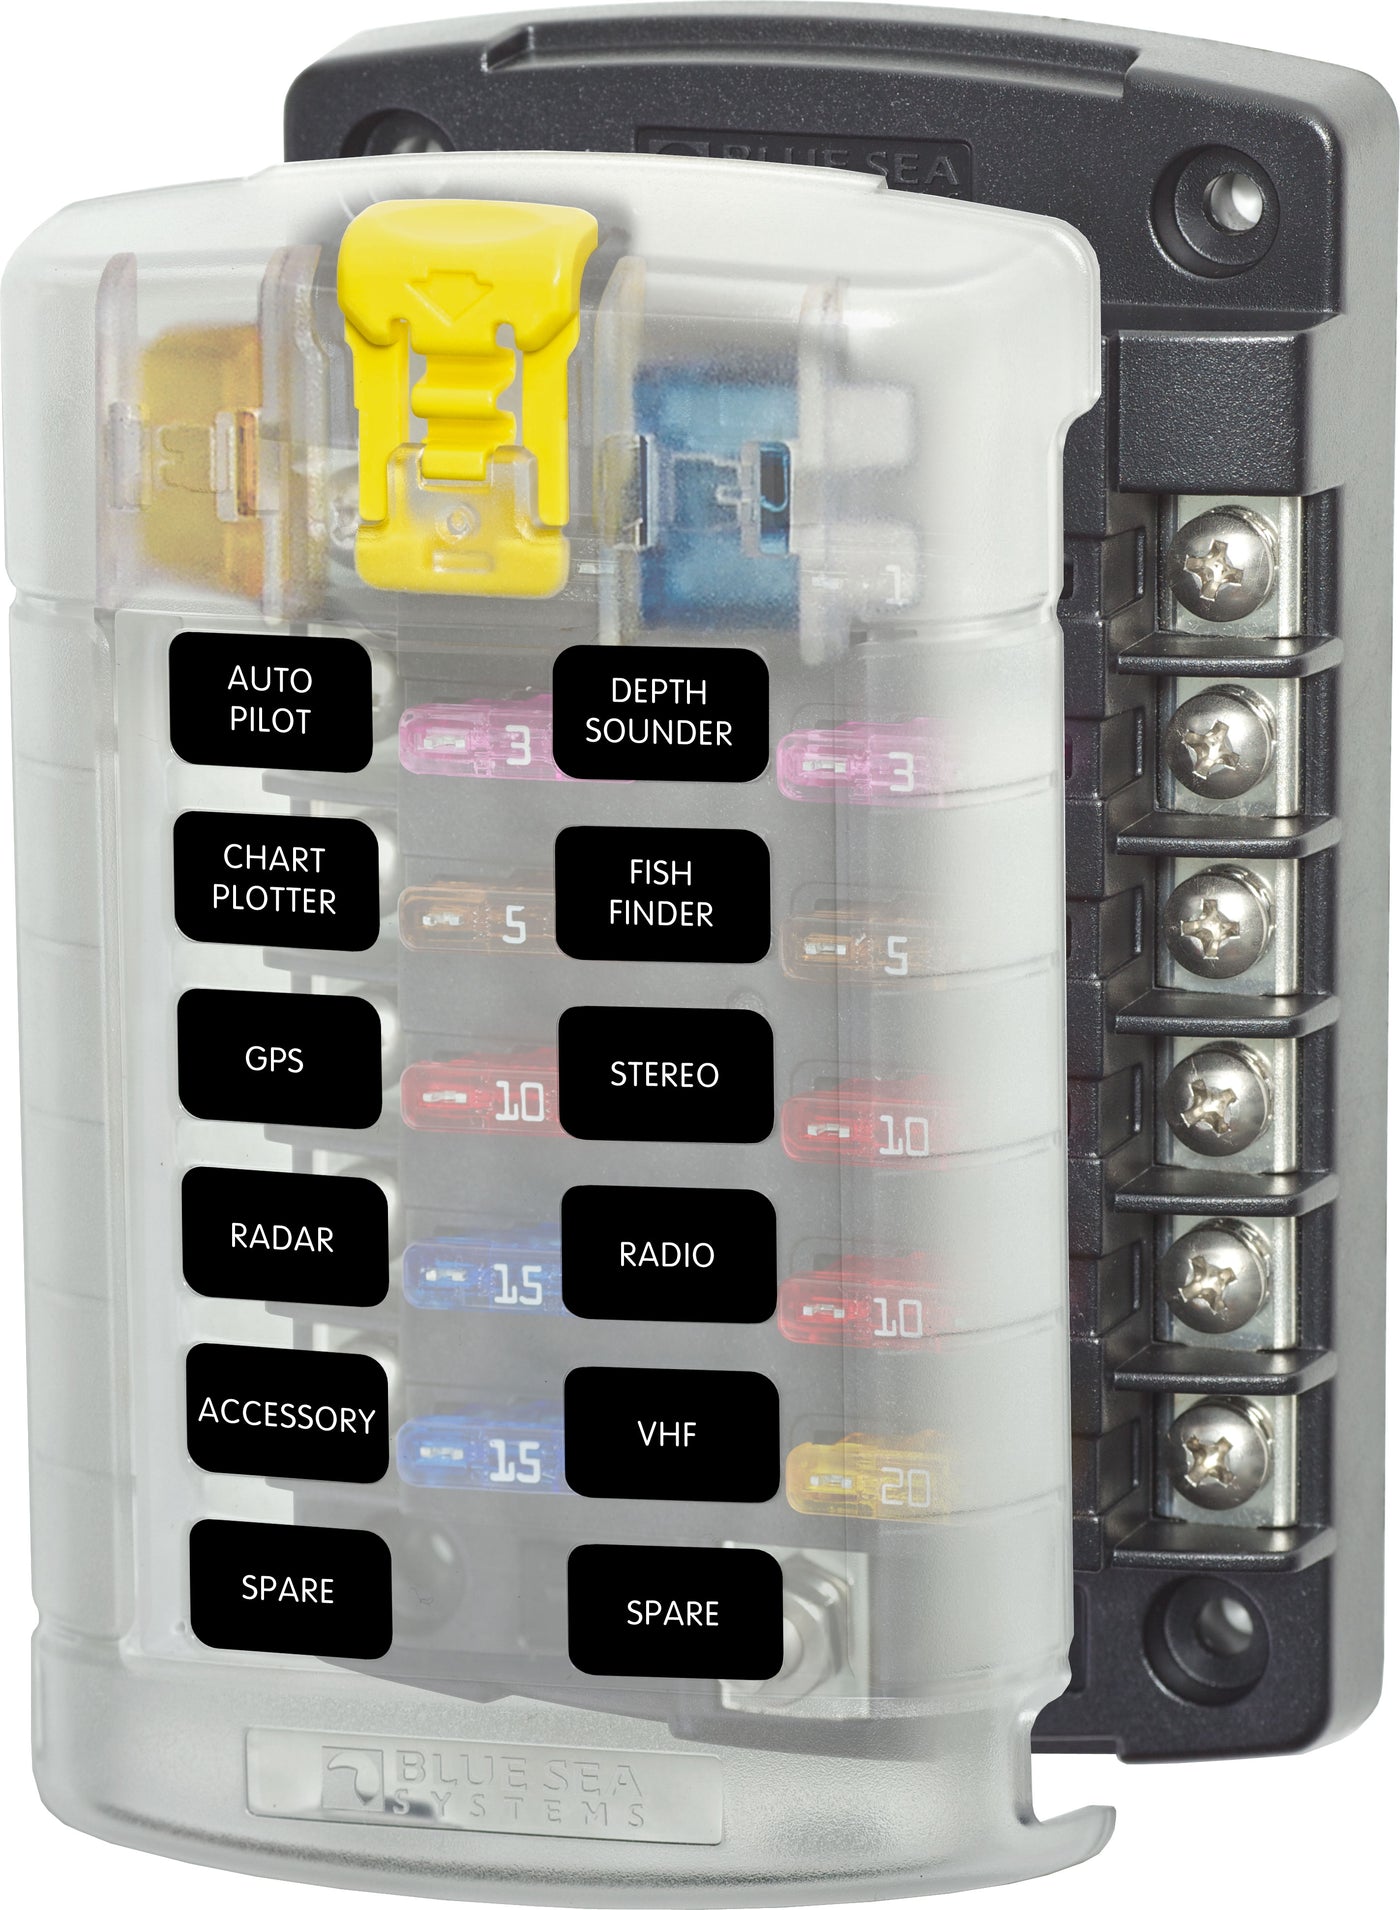 Blue Sea 5029 ST Blade Fuse Block - 12 Circuits with Cover